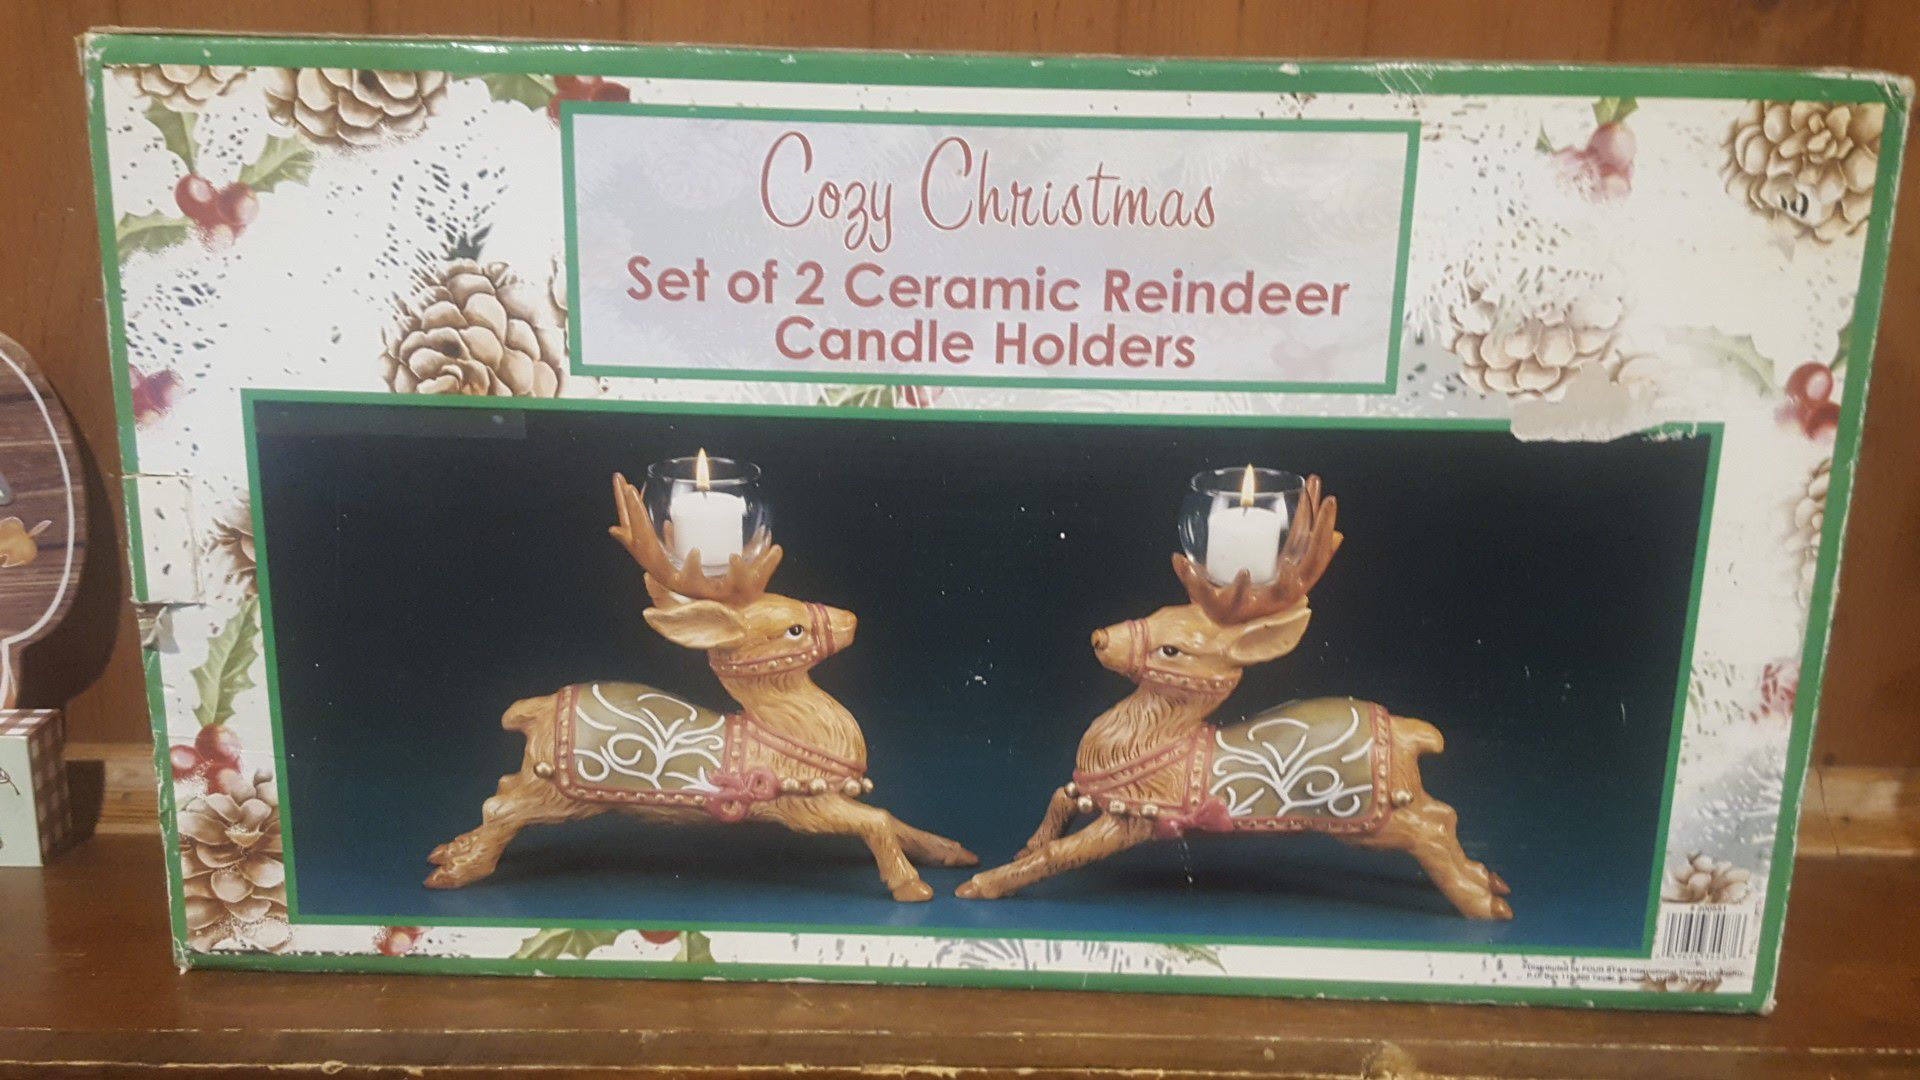 Cozy Christmas set of 2 Ceramic Reindeer Candle Holders